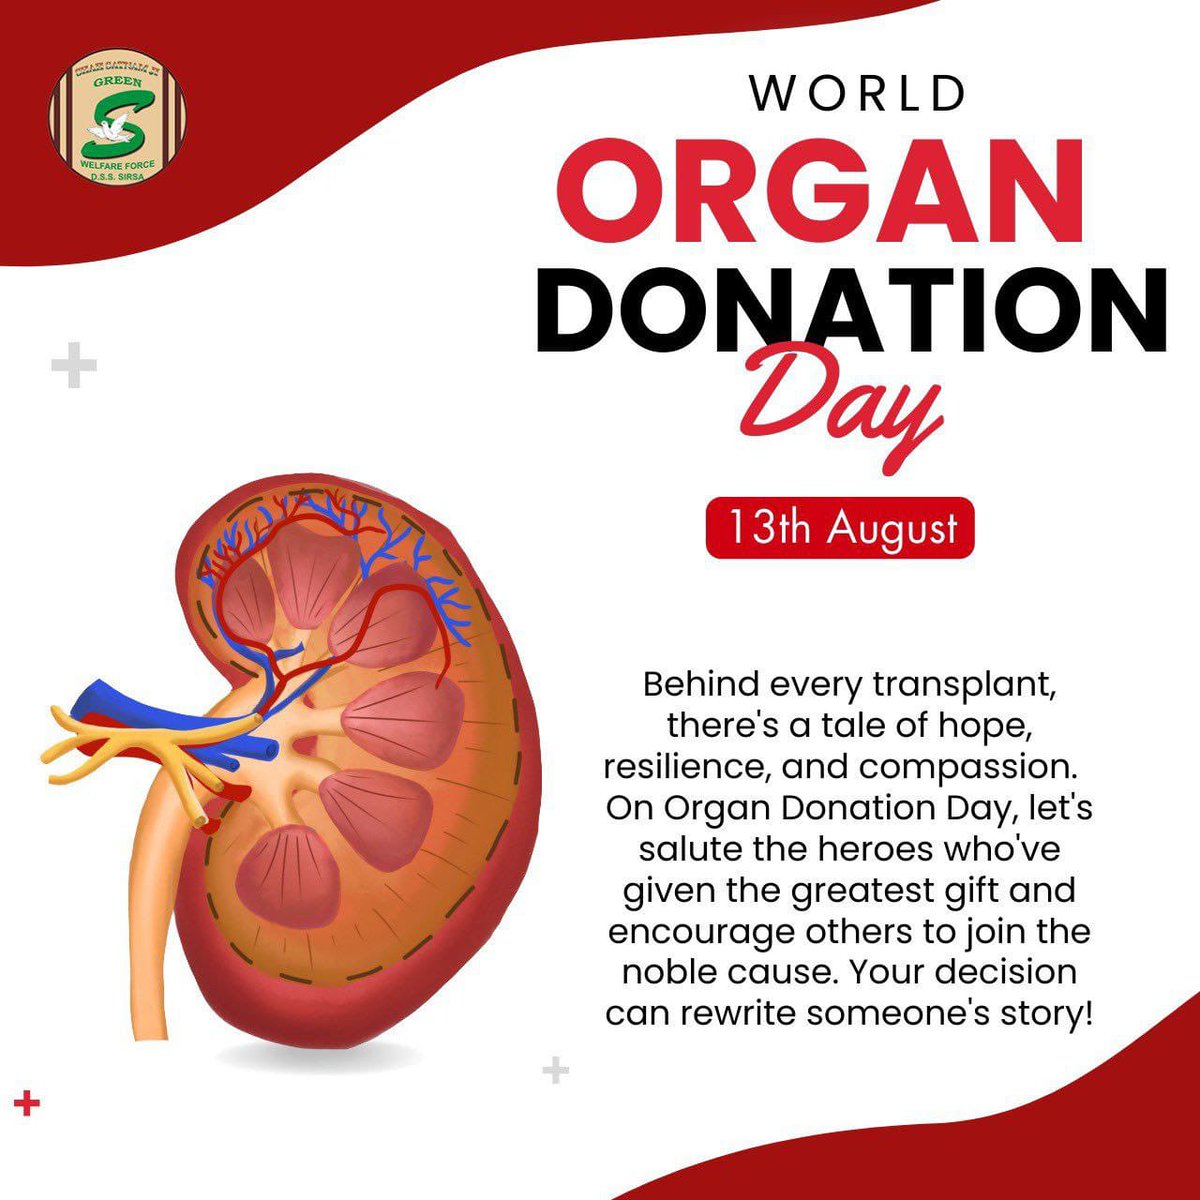 Today, on #WorldOrganDonationDay, let's appreciate Saint MSG Insan who has inspired thousands of people to donate organs for saving others' lives.
Under his motivation, Dera Sacha Sauda volunteers have set many examples of humanity with eye, kidney, blood and body donations.